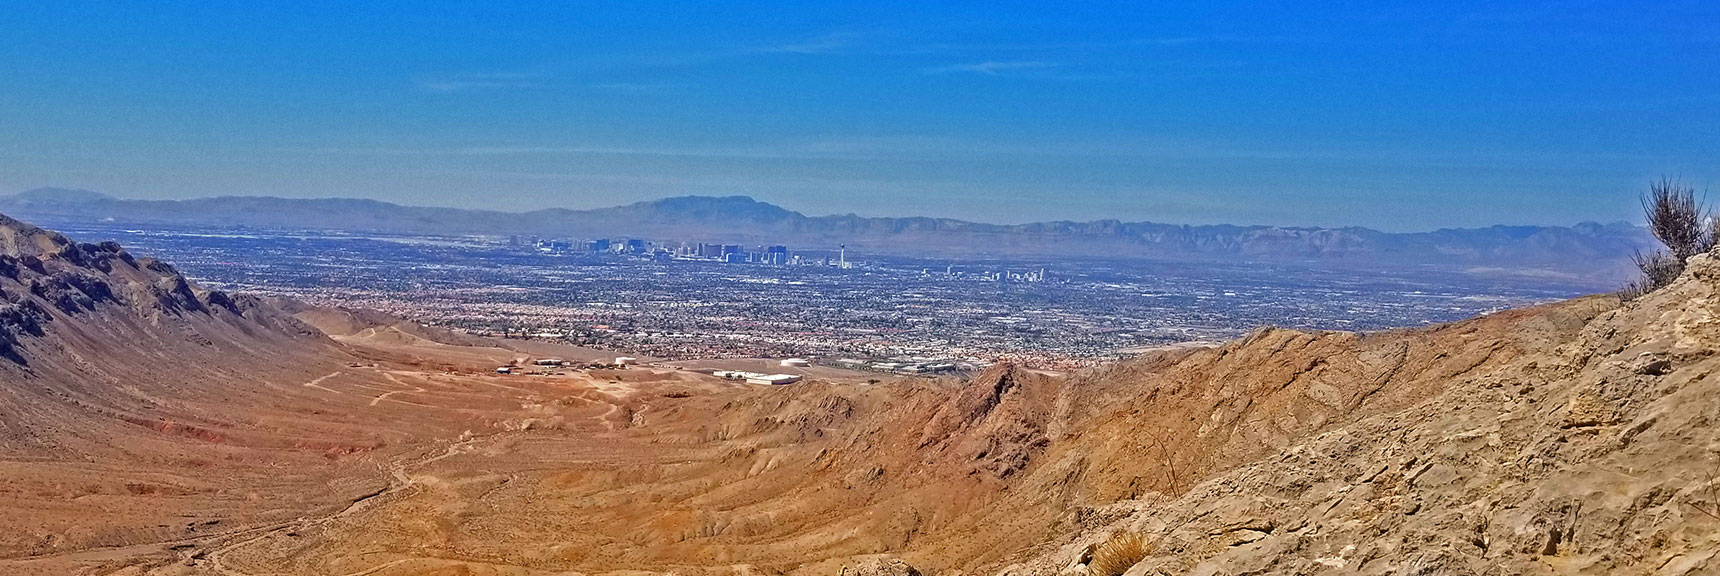 Larger View Down to Vegas and Beyond While Ascending More Gradual Slope to Right (East) of Cairn Wash | Sunrise Mountain, Las Vegas, Nevada